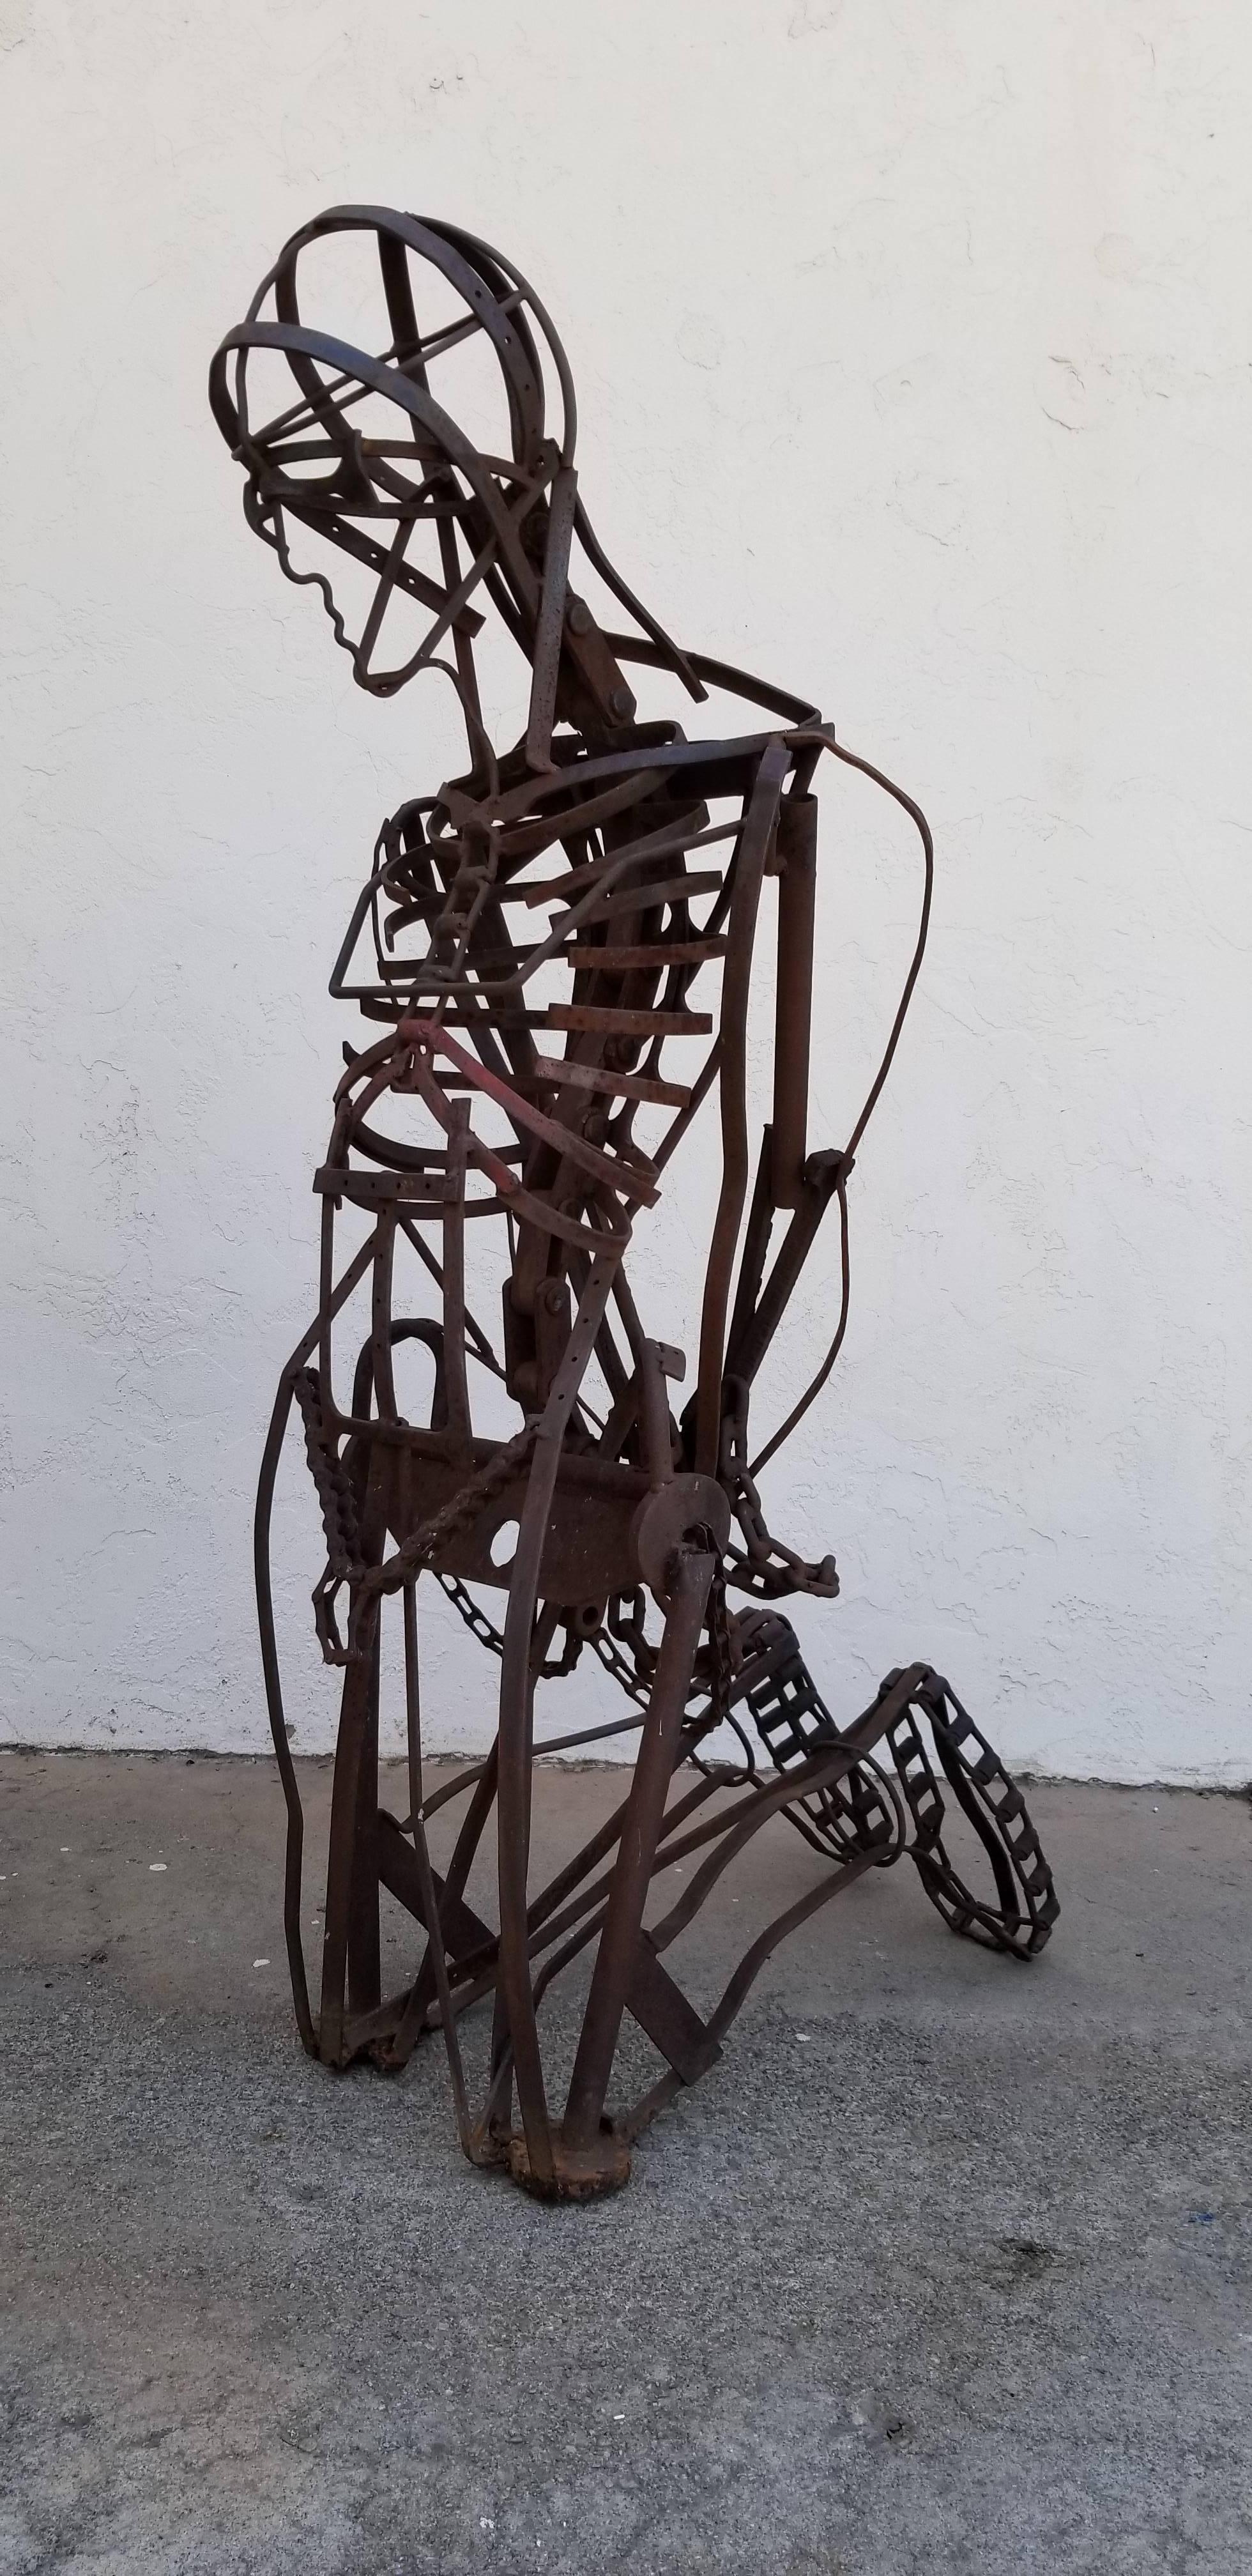 Exceptional large-scale, abstract human figure in bondage, assemblage iron and steel sculpture. Skilfully detailed kneeling figure created from various iron and steel parts welded to form. Unique example of the Industrial / Brutalist / Assemblage